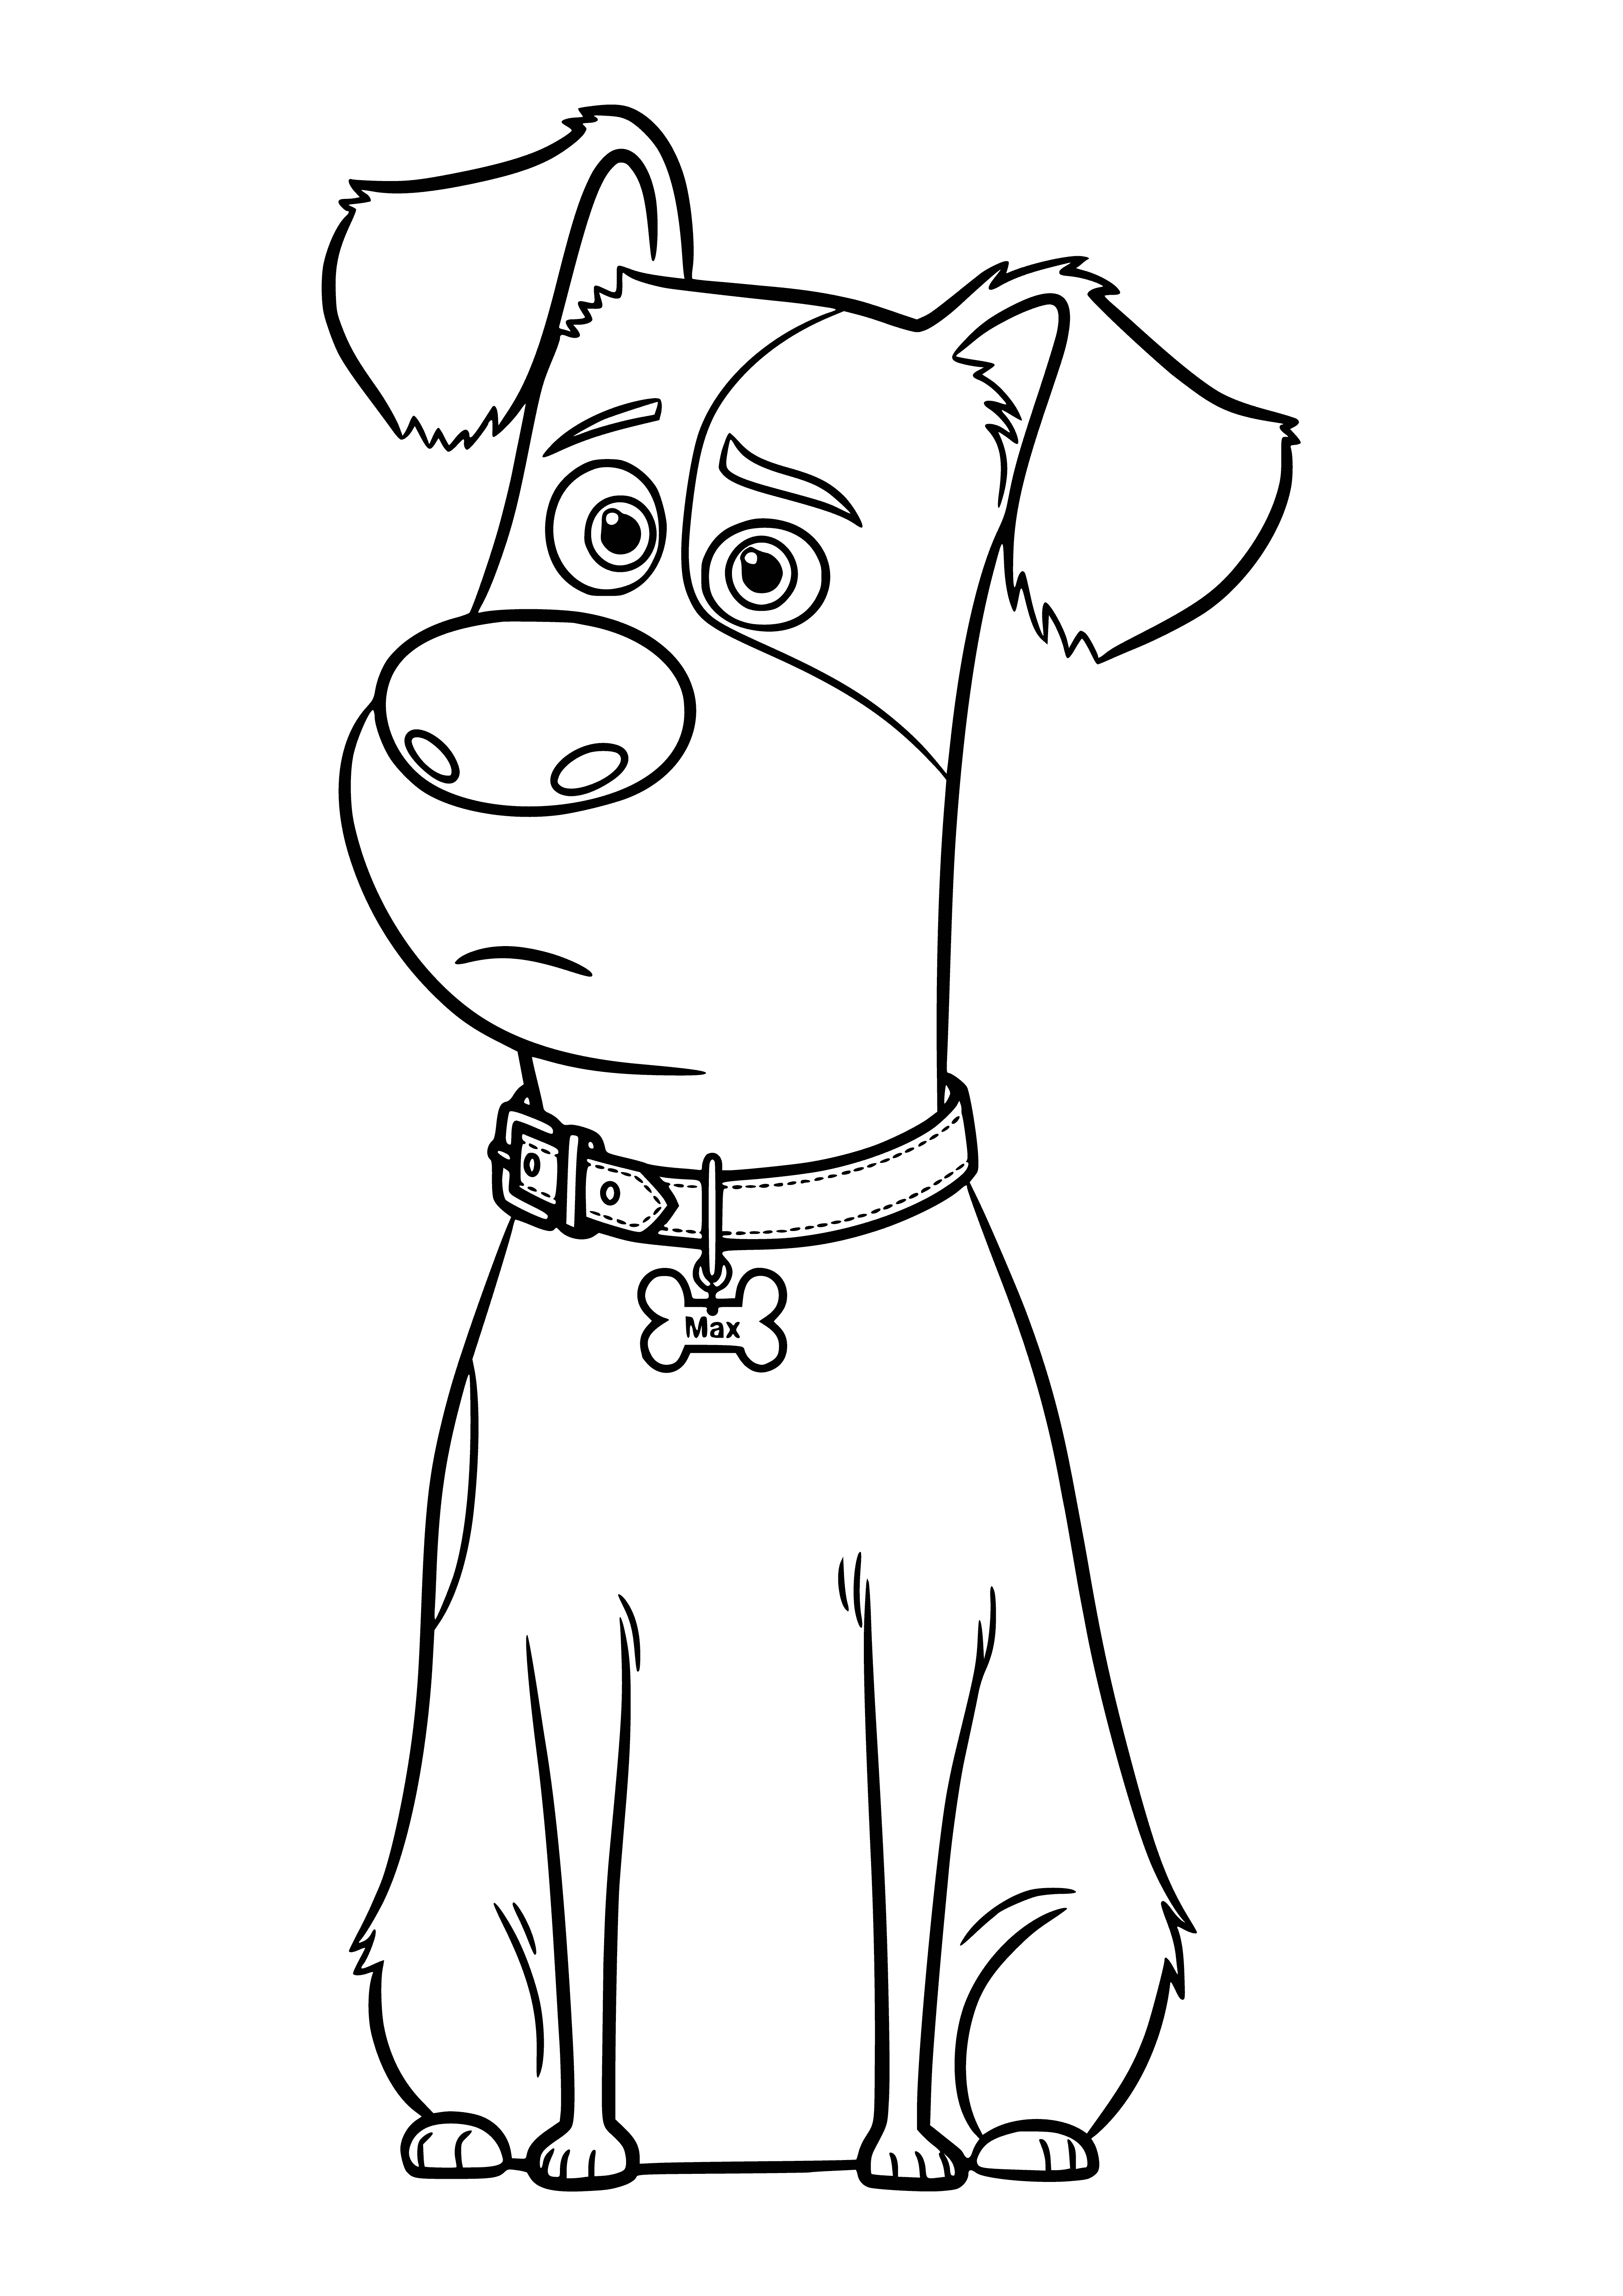 coloring page: Max the terrier is running around the backyard, chasing his beloved ball. #dog #aww #love